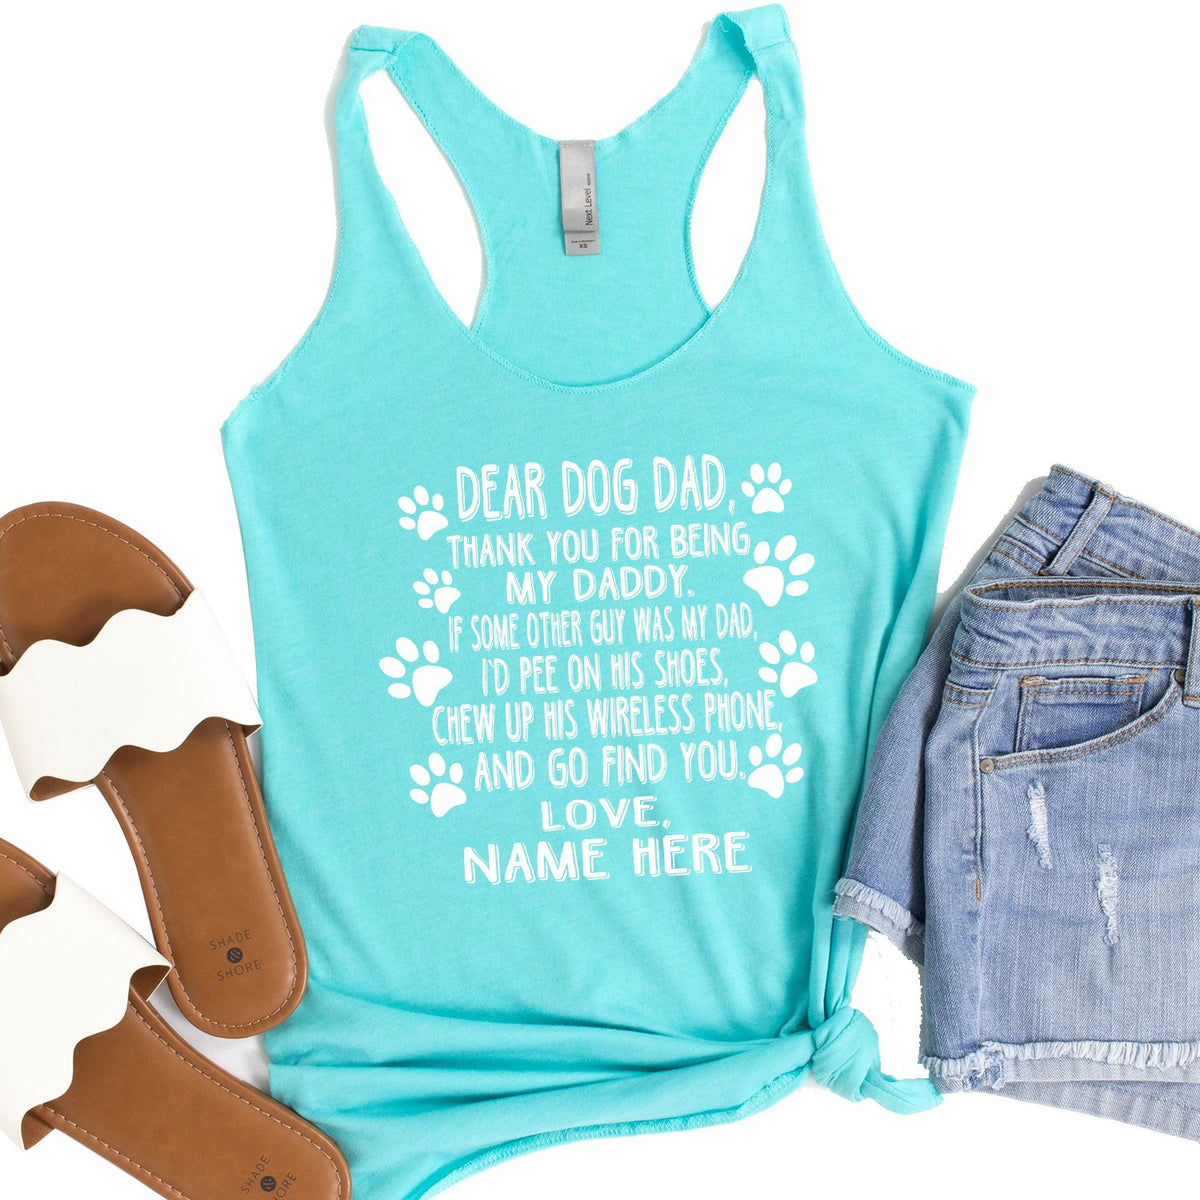 Dear Dog Dad Thank You For Being My Daddy - Tank Top Racerback